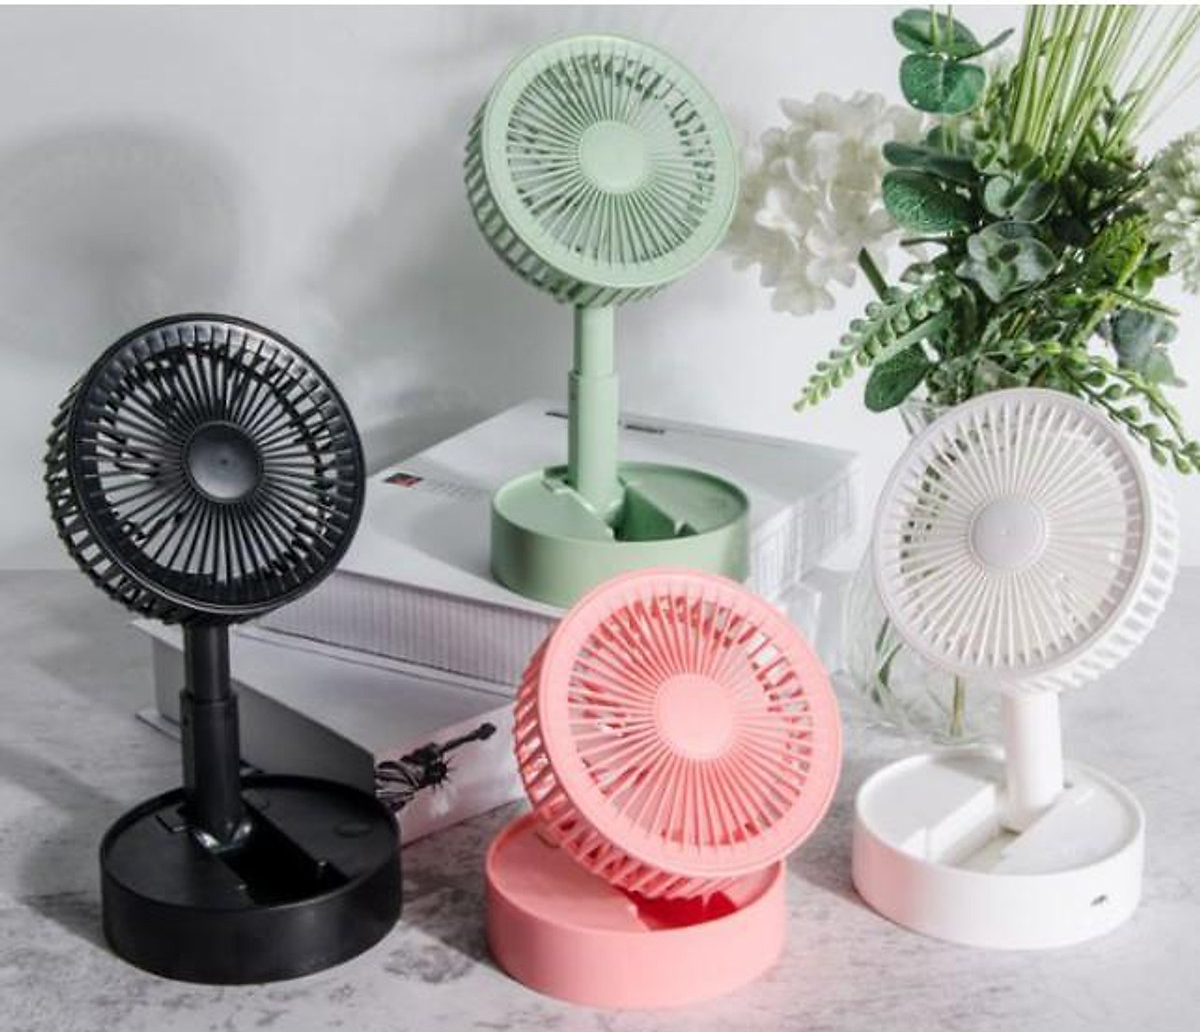 Compact and convenient desk fans are sure to be needed by office ladies this summer - Photo 7.